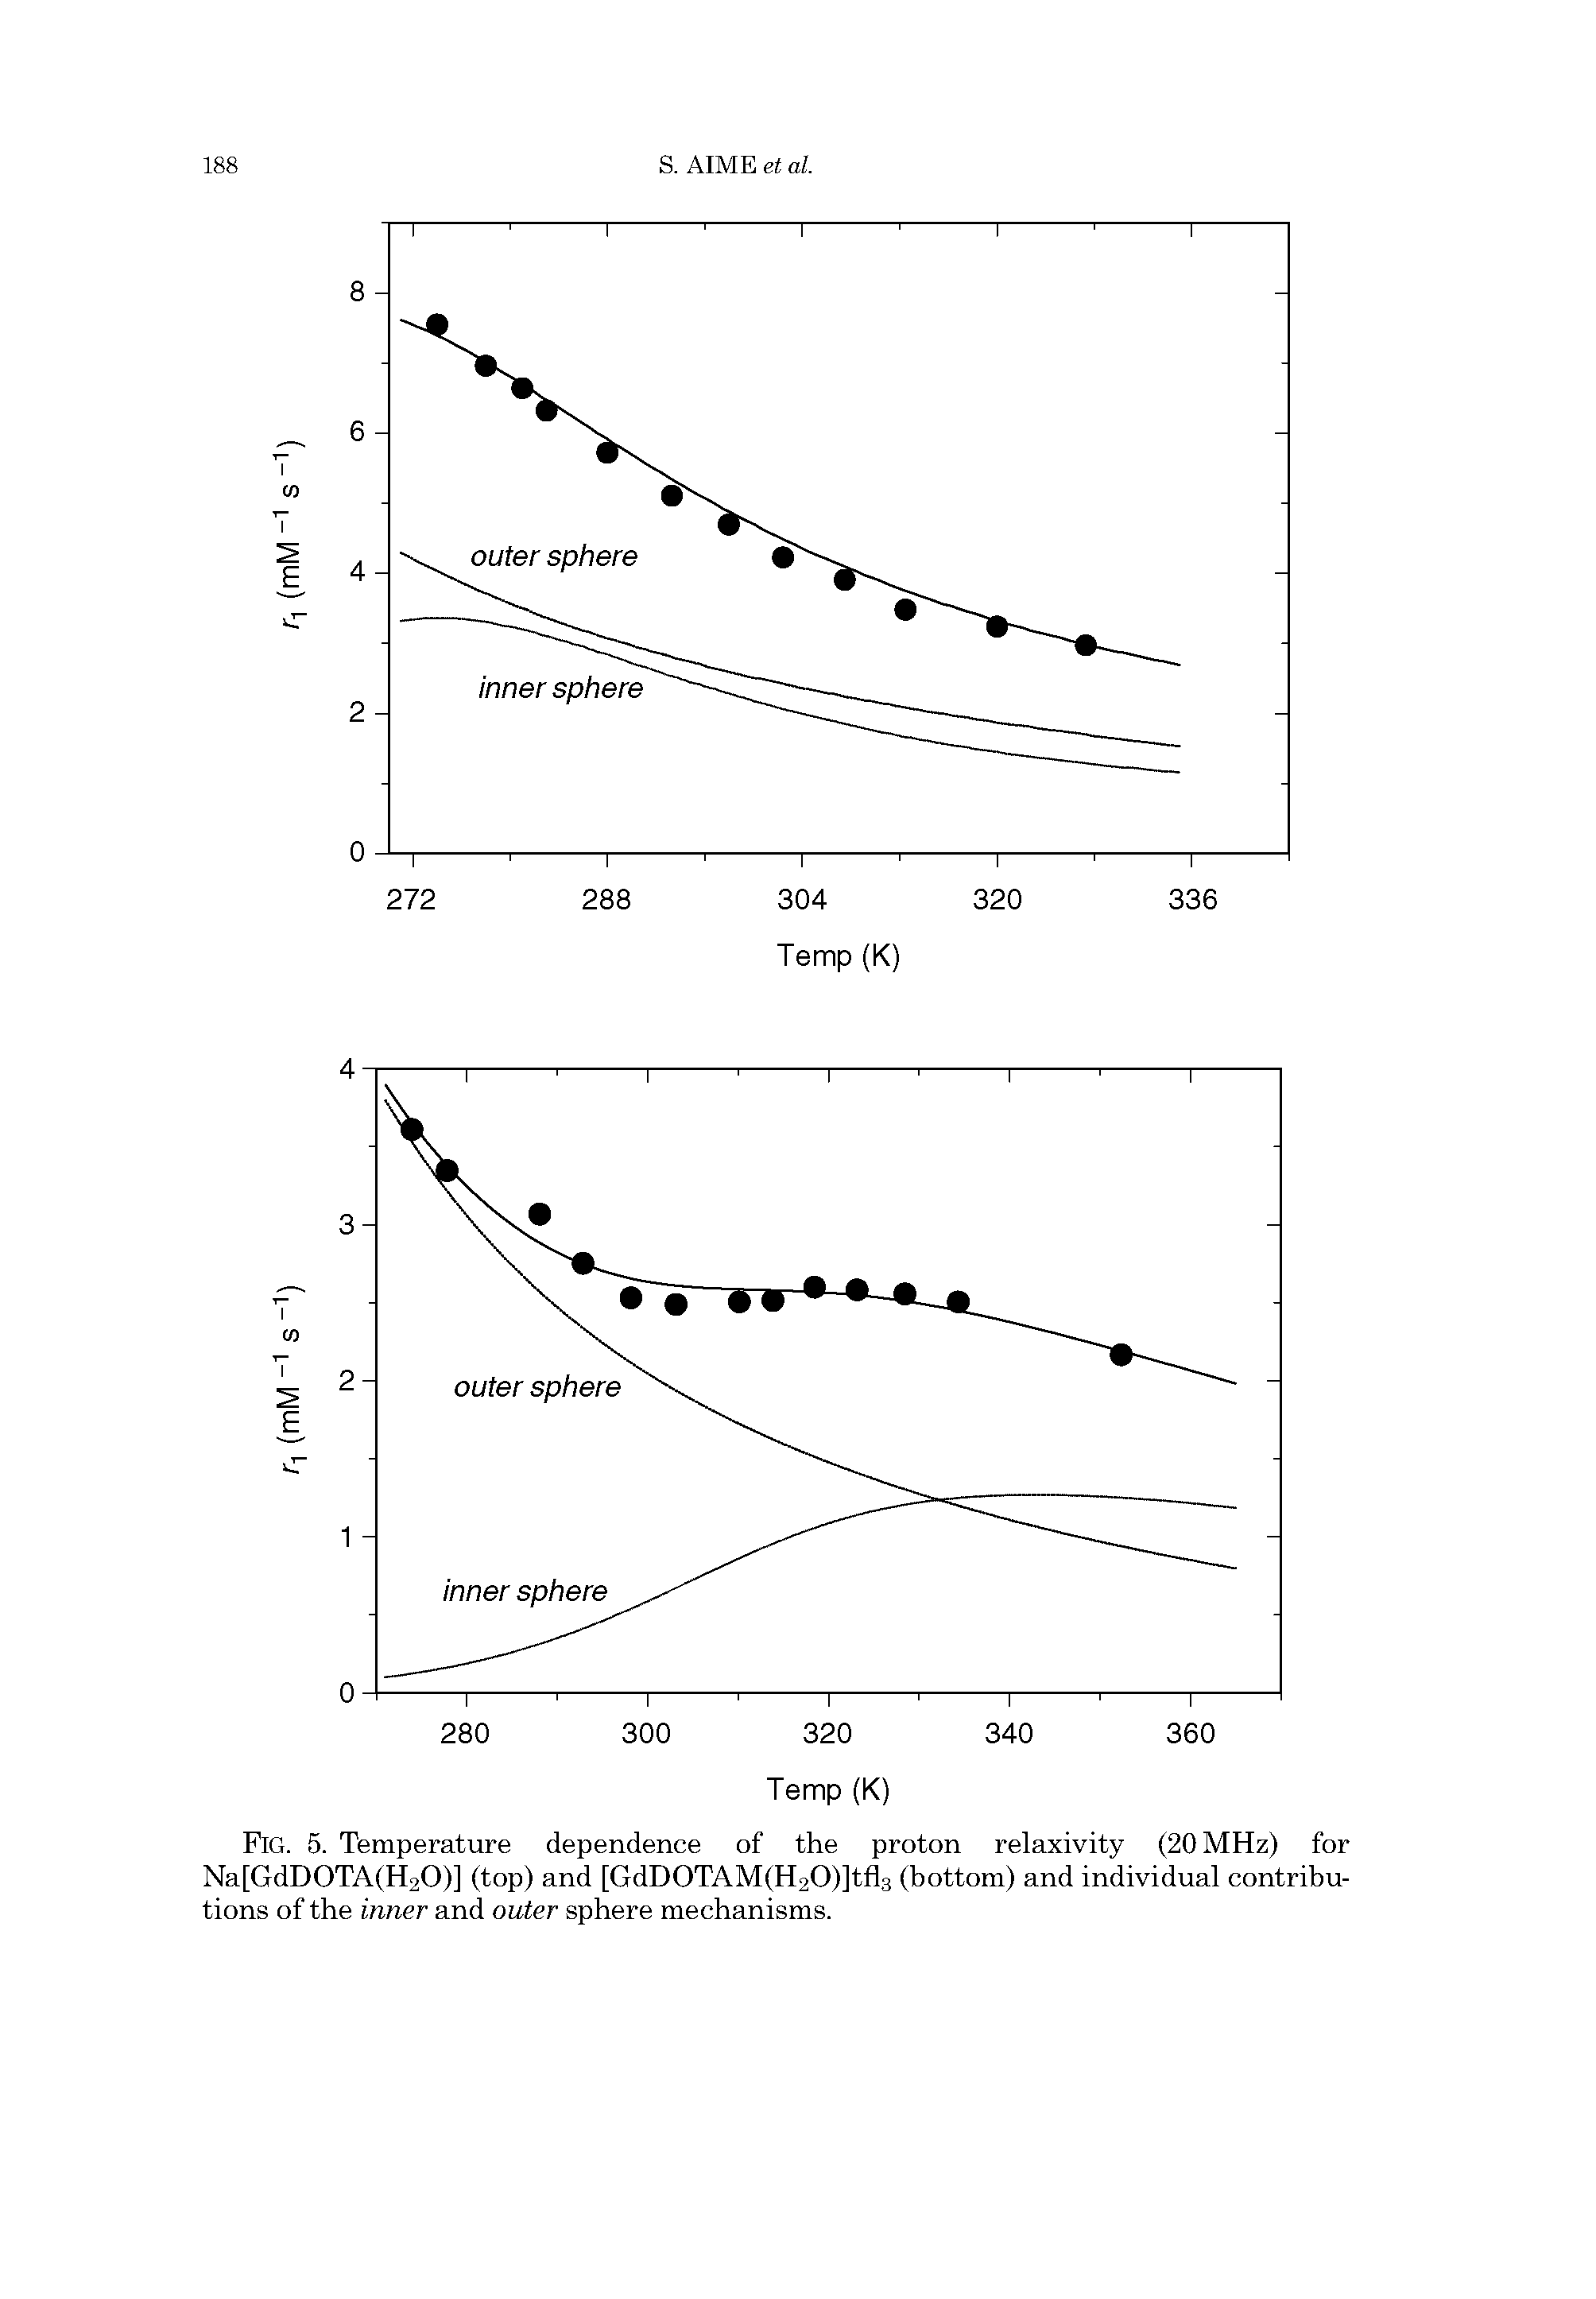 Fig. 5. Temperature dependence of the proton relaxivity (20 MHz) for Na[GdD0TA(H20)] (top) and [GdD0TAM(H20)]tfl3 (bottom) and individual contributions of the inner and outer sphere mechanisms.